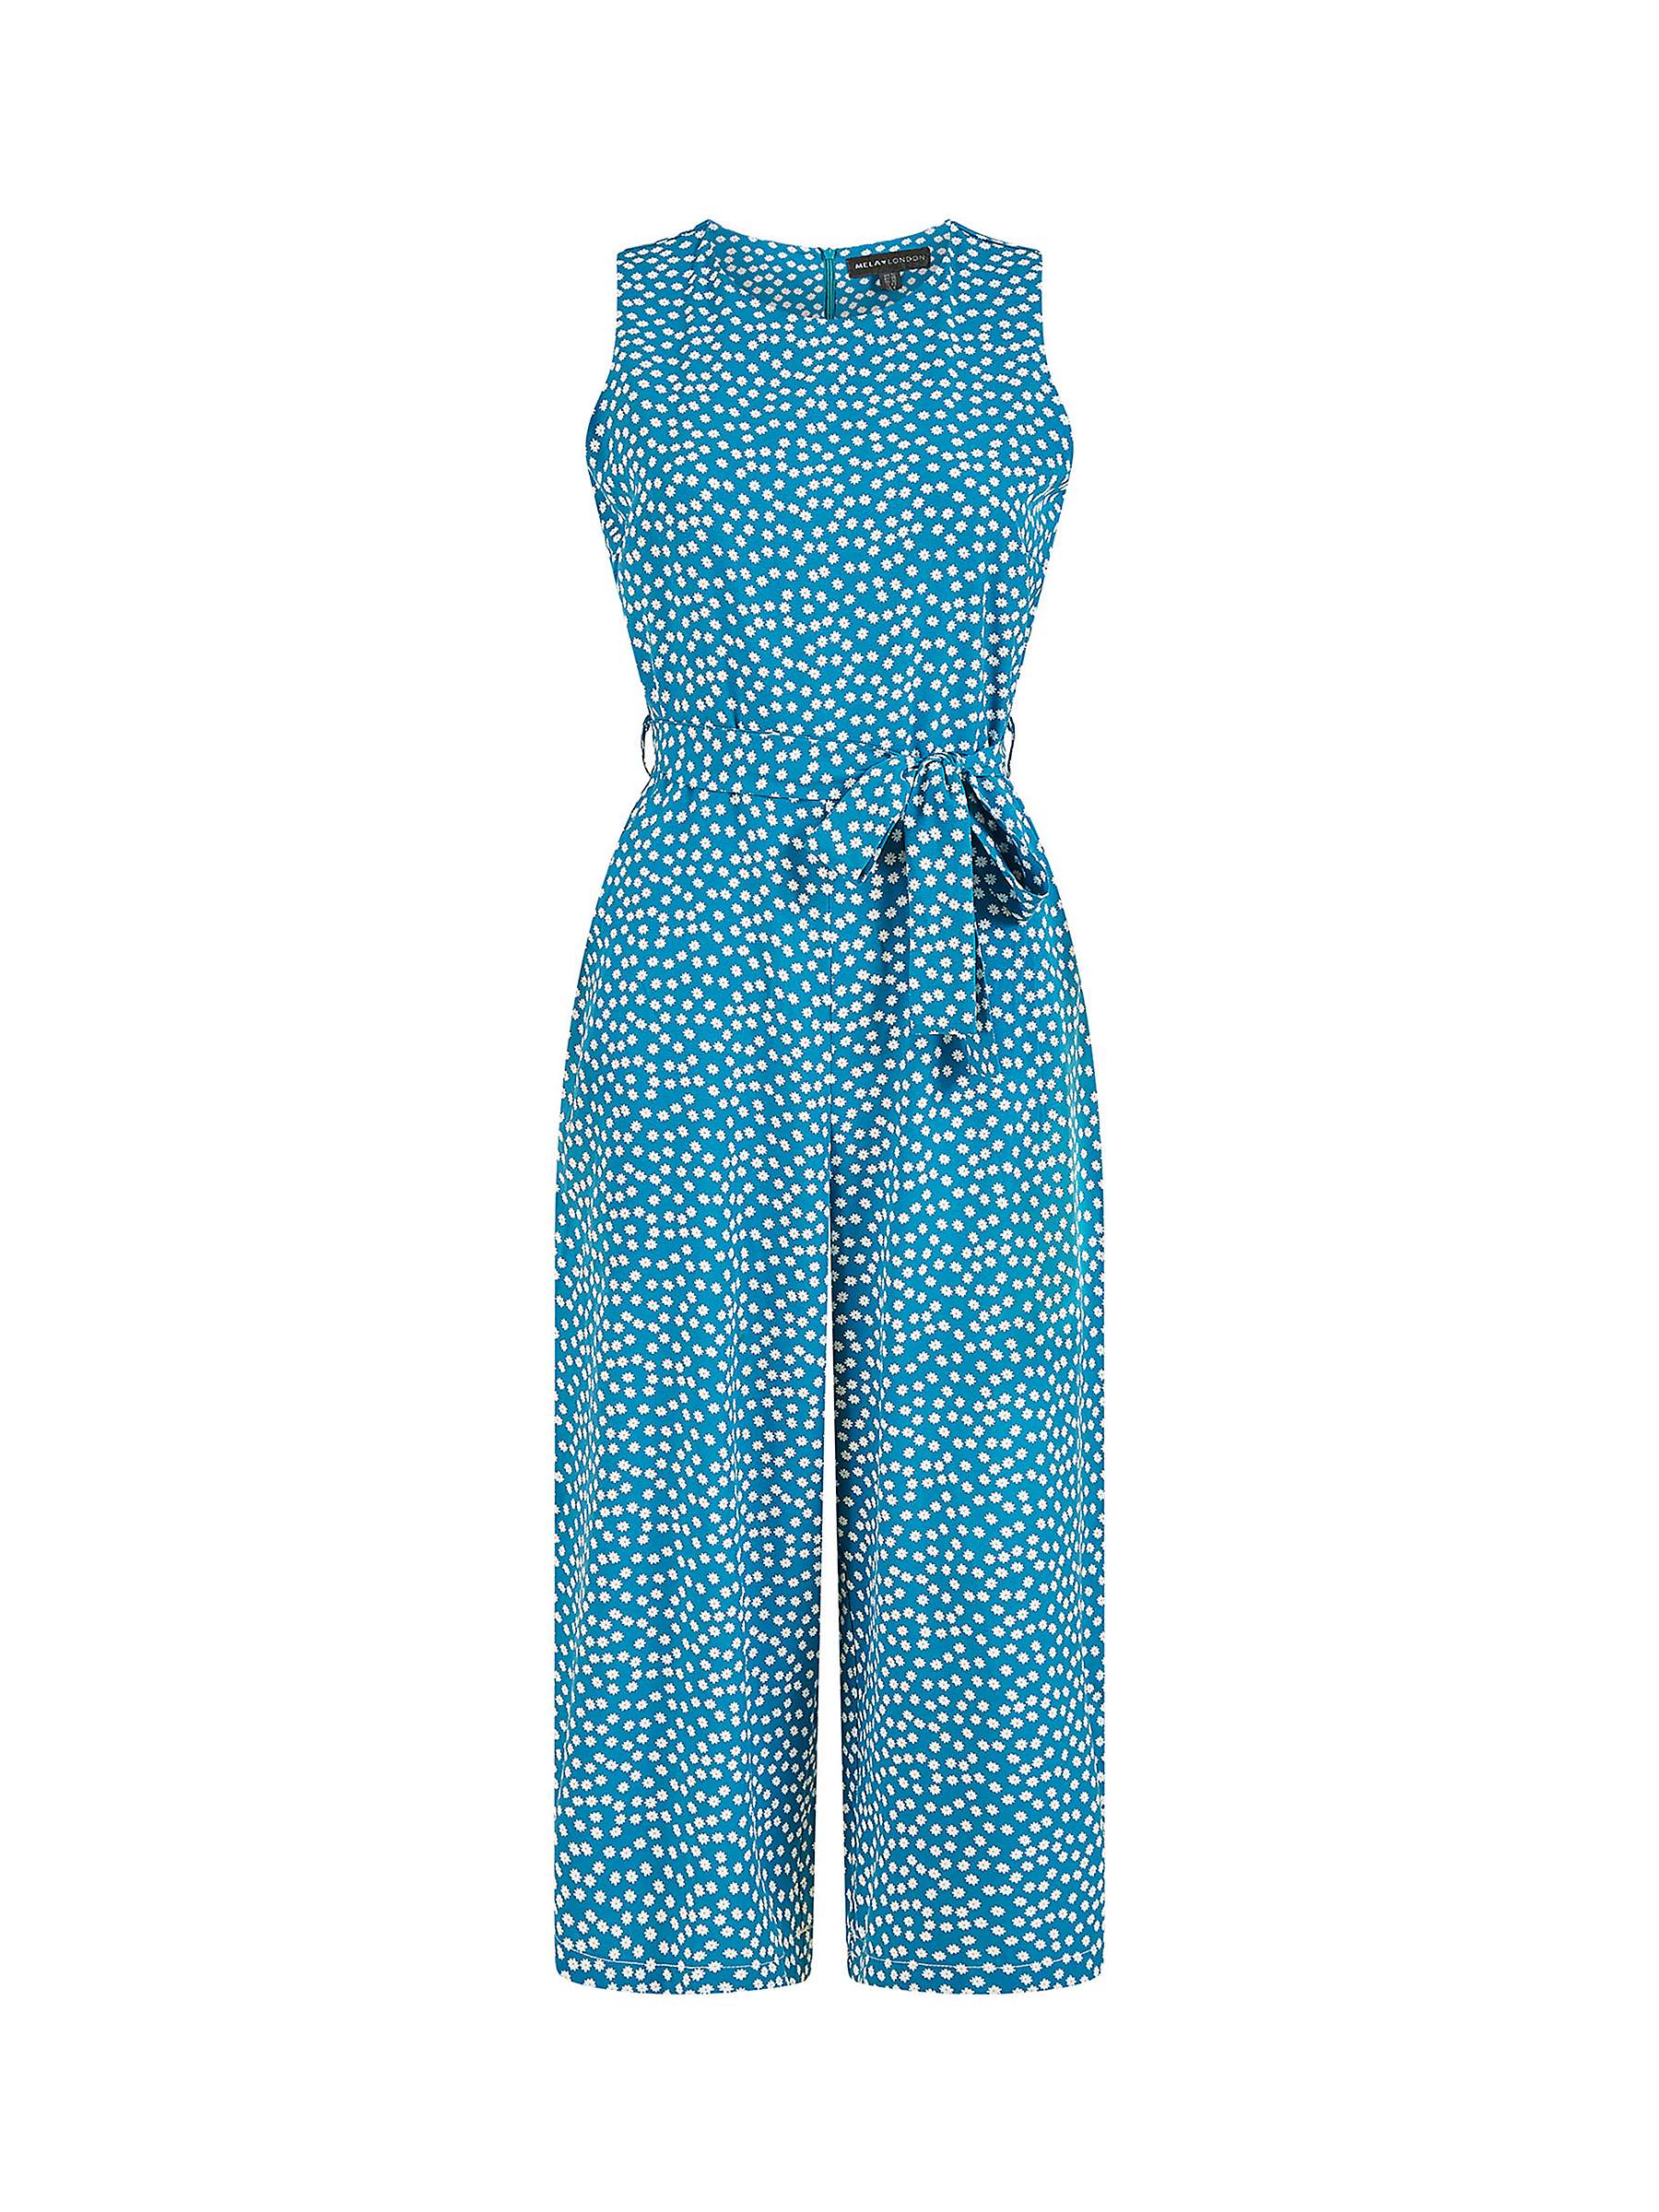 Buy Mela London Ditsy Daisy Sleeveless Culotte Jumpsuit, Teal Online at johnlewis.com